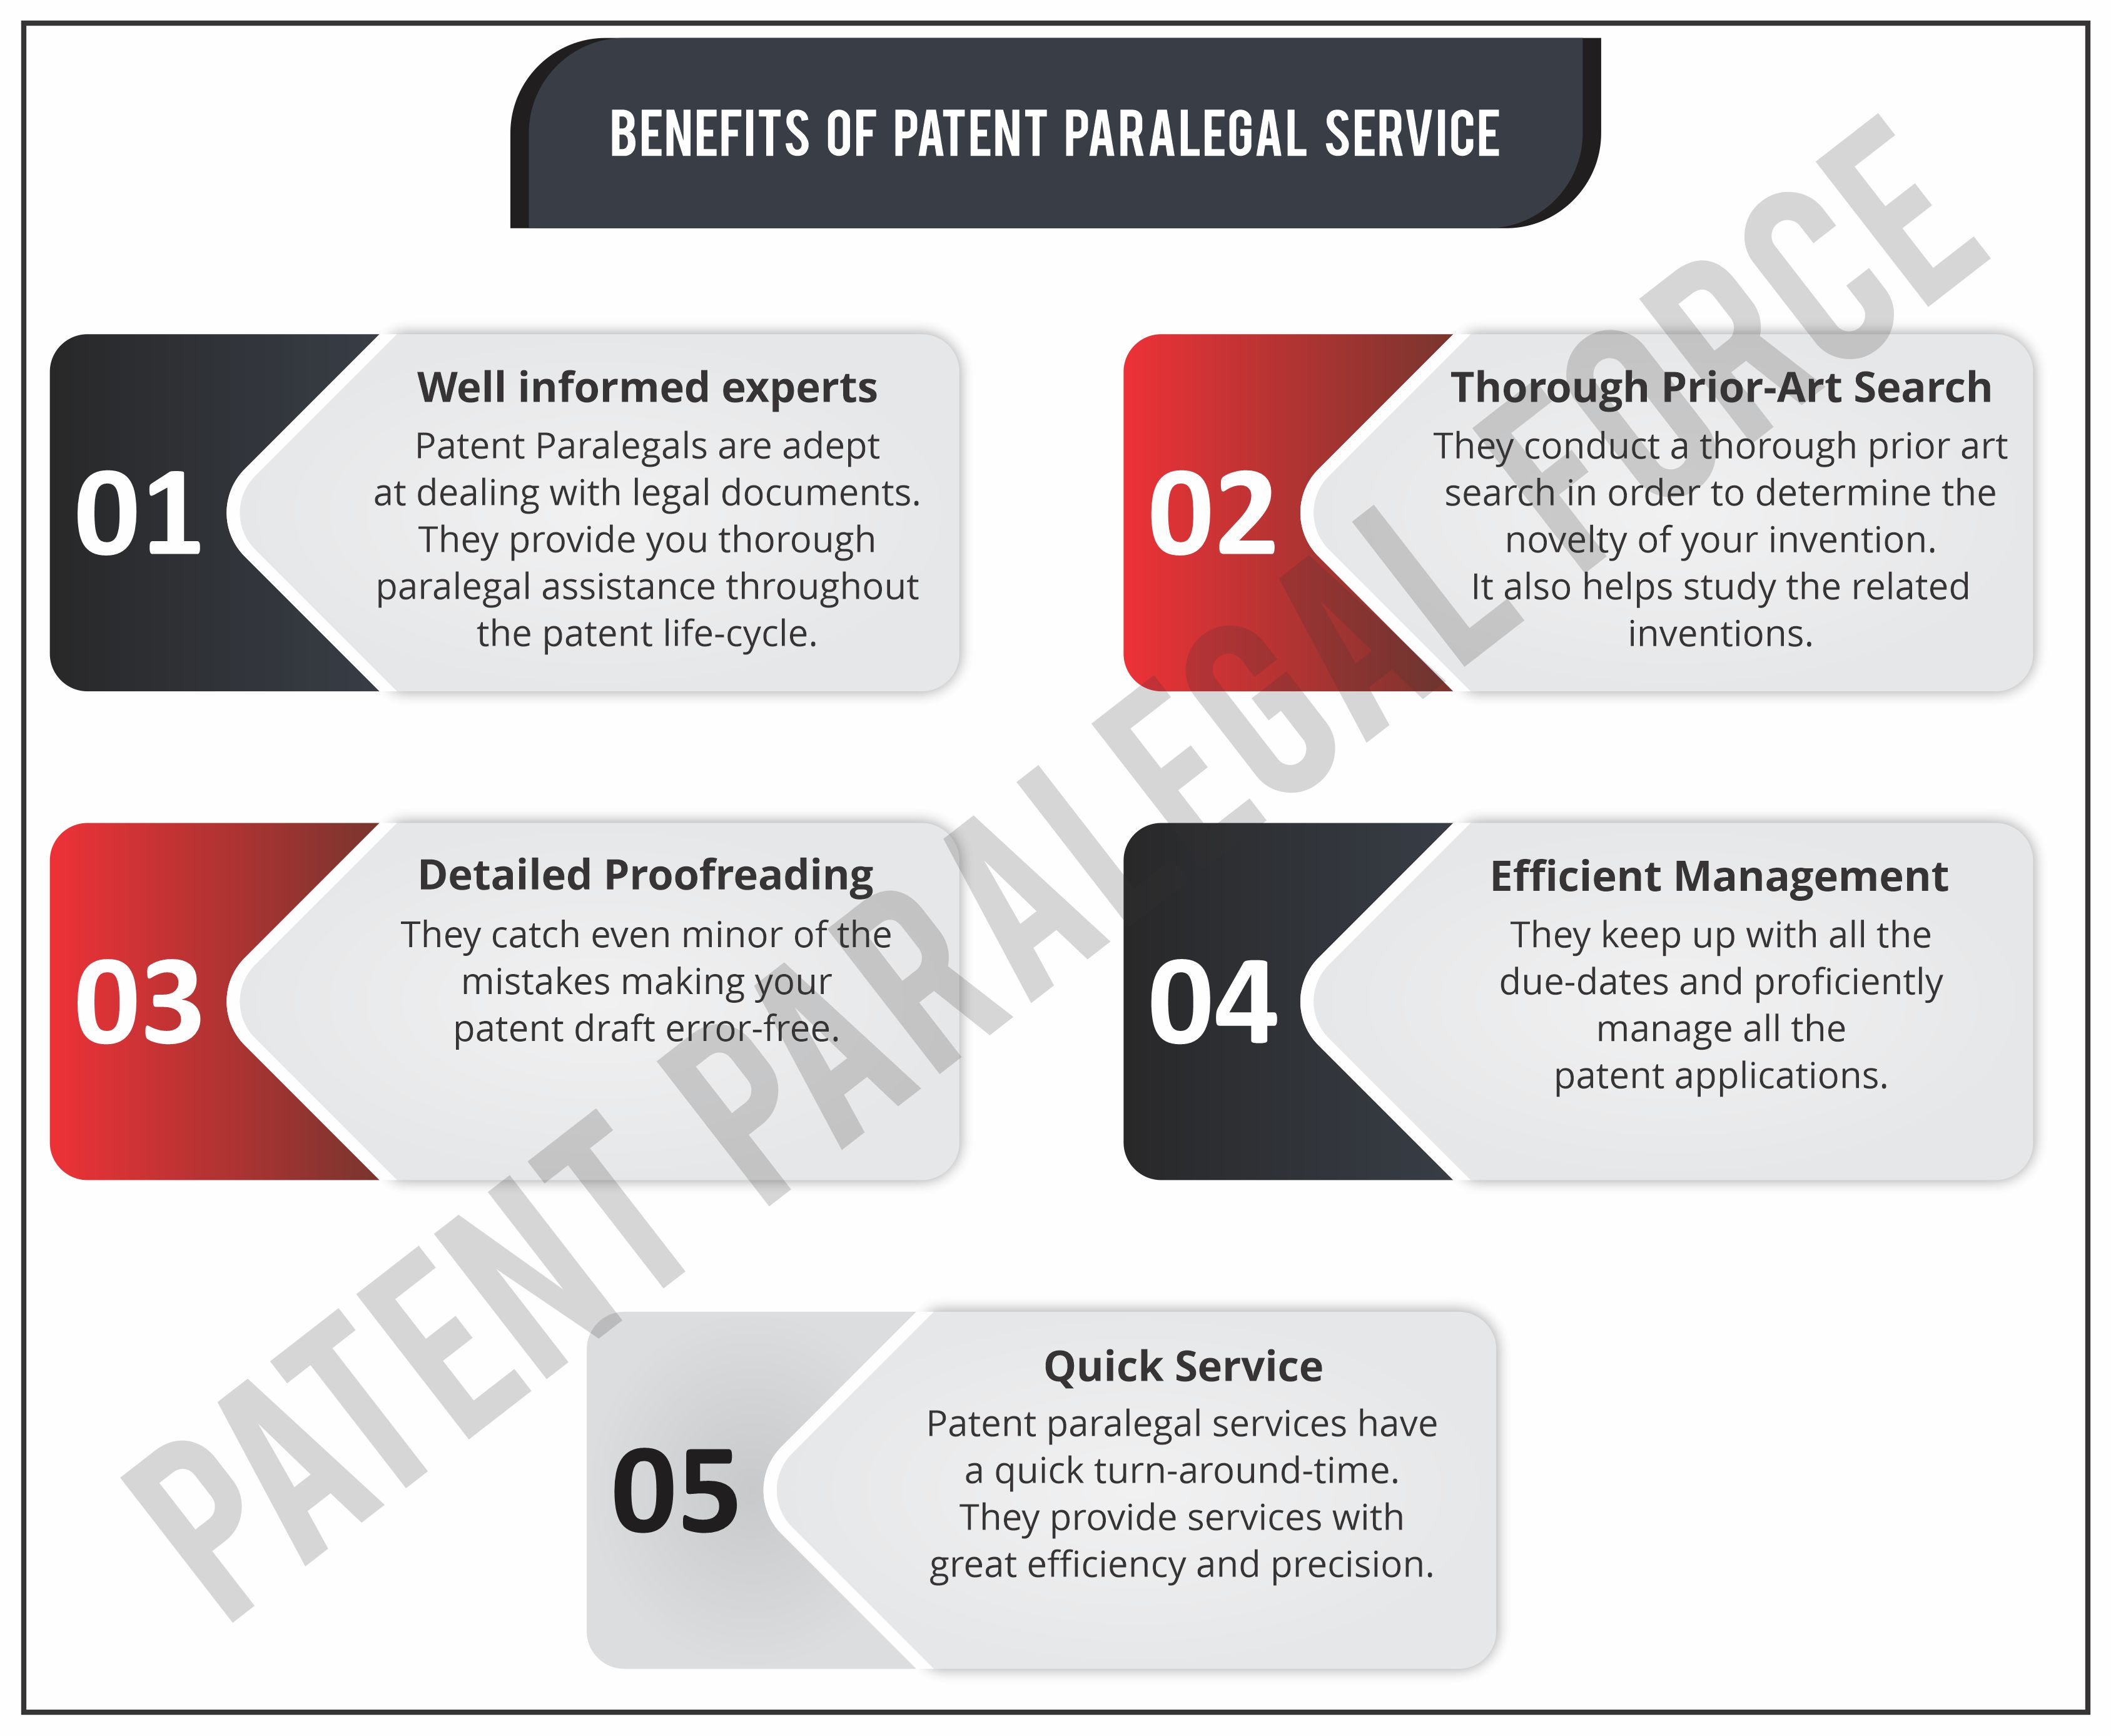 Benefits of Patent Paralegal Service